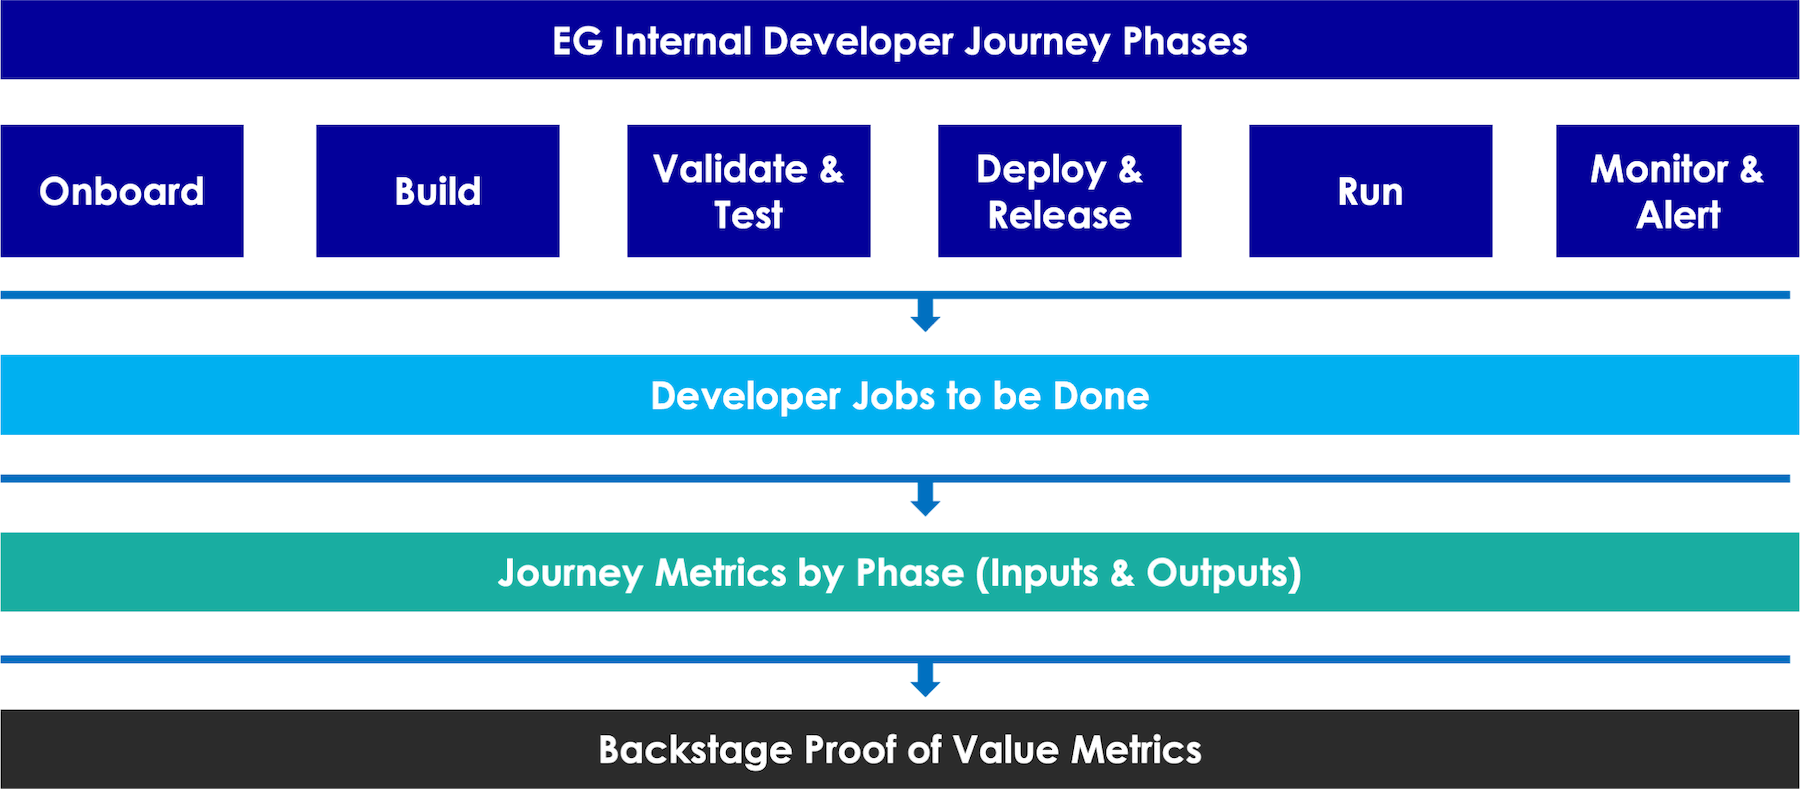 Expedia Group Internal Developer Journey Phases, from top to bottom: onboard, build, validate & test, deploy & release, run monitor & run; developer jobs to be done; journey metrics by phase (inputs & outputs); Backstage proof of value metrics